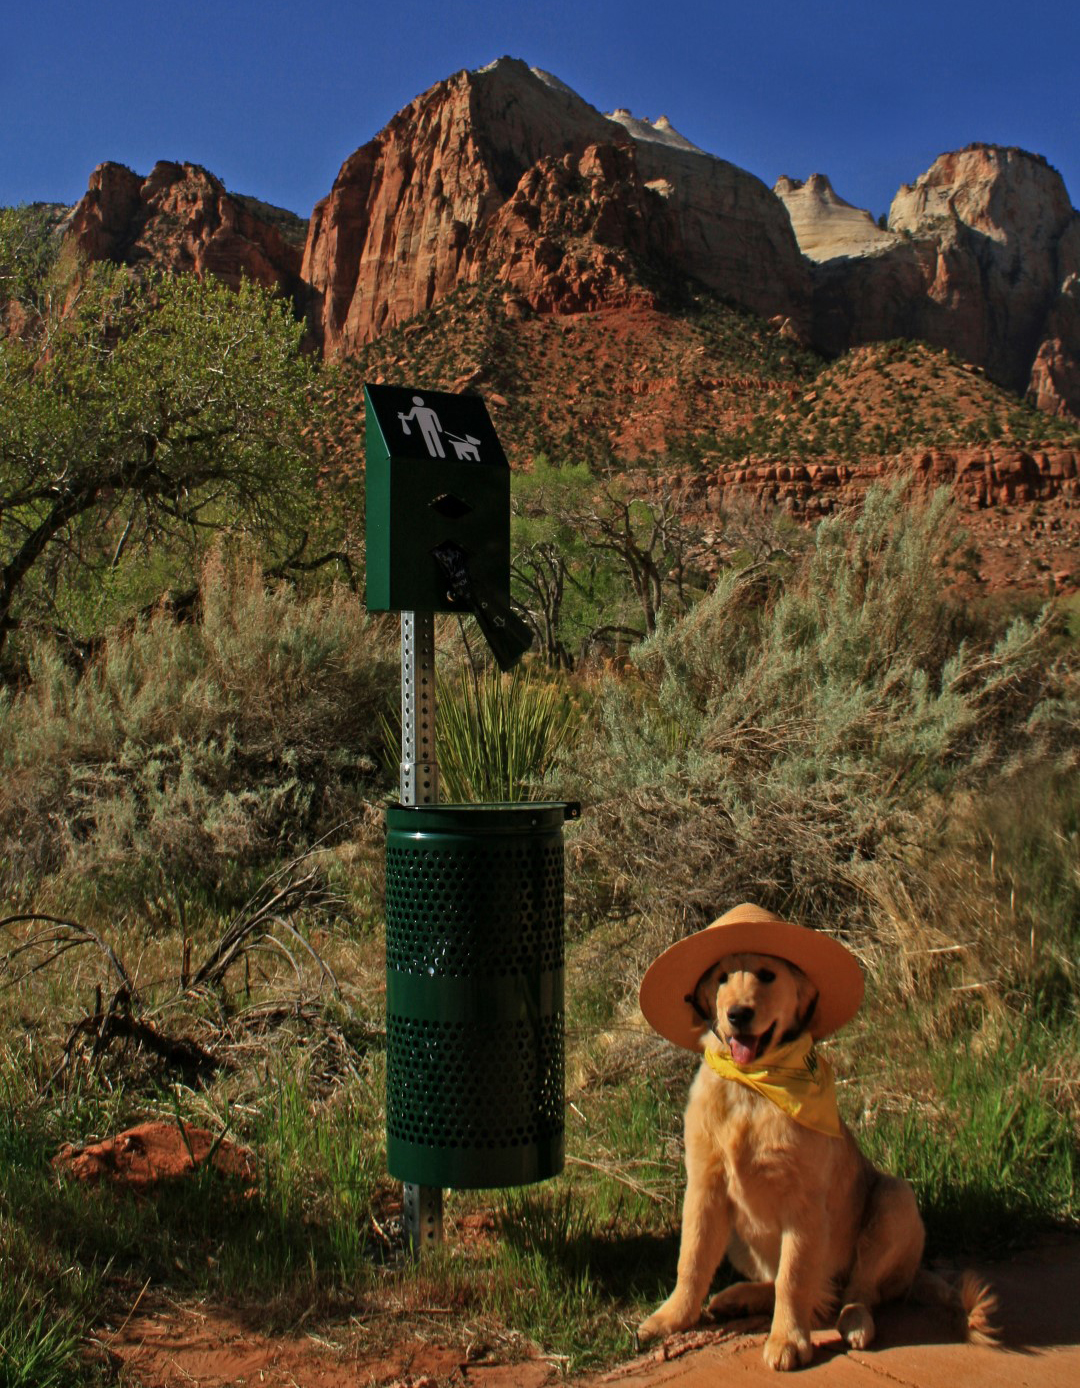 Pa’rus Trail is the only leashed-pet-accessible trail in Zion and starts right at the Visitors Center. Zion Ranger Rosie Retriever wants you to know that the new pet waste stations on Pa'rus Trail ensure she limits her impact by leaving only paw prints in her national park. Photo by Jonathan Fortner, NPS.